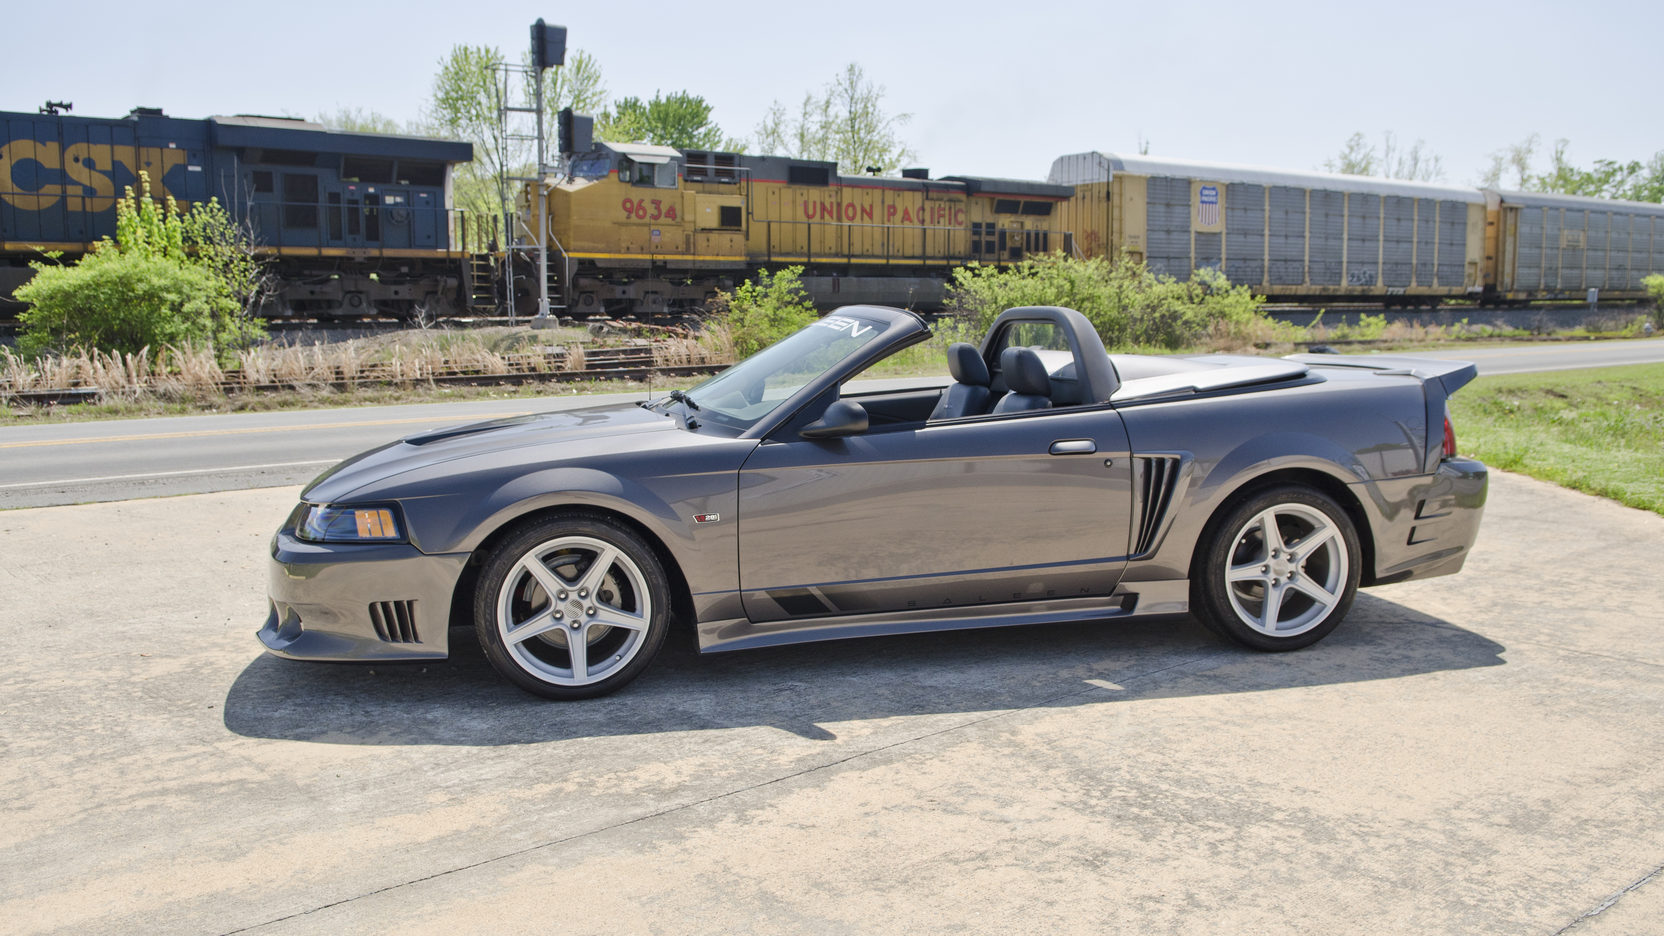 Mustang Of The Day: 2003 Ford Mustang Saleen Convertible